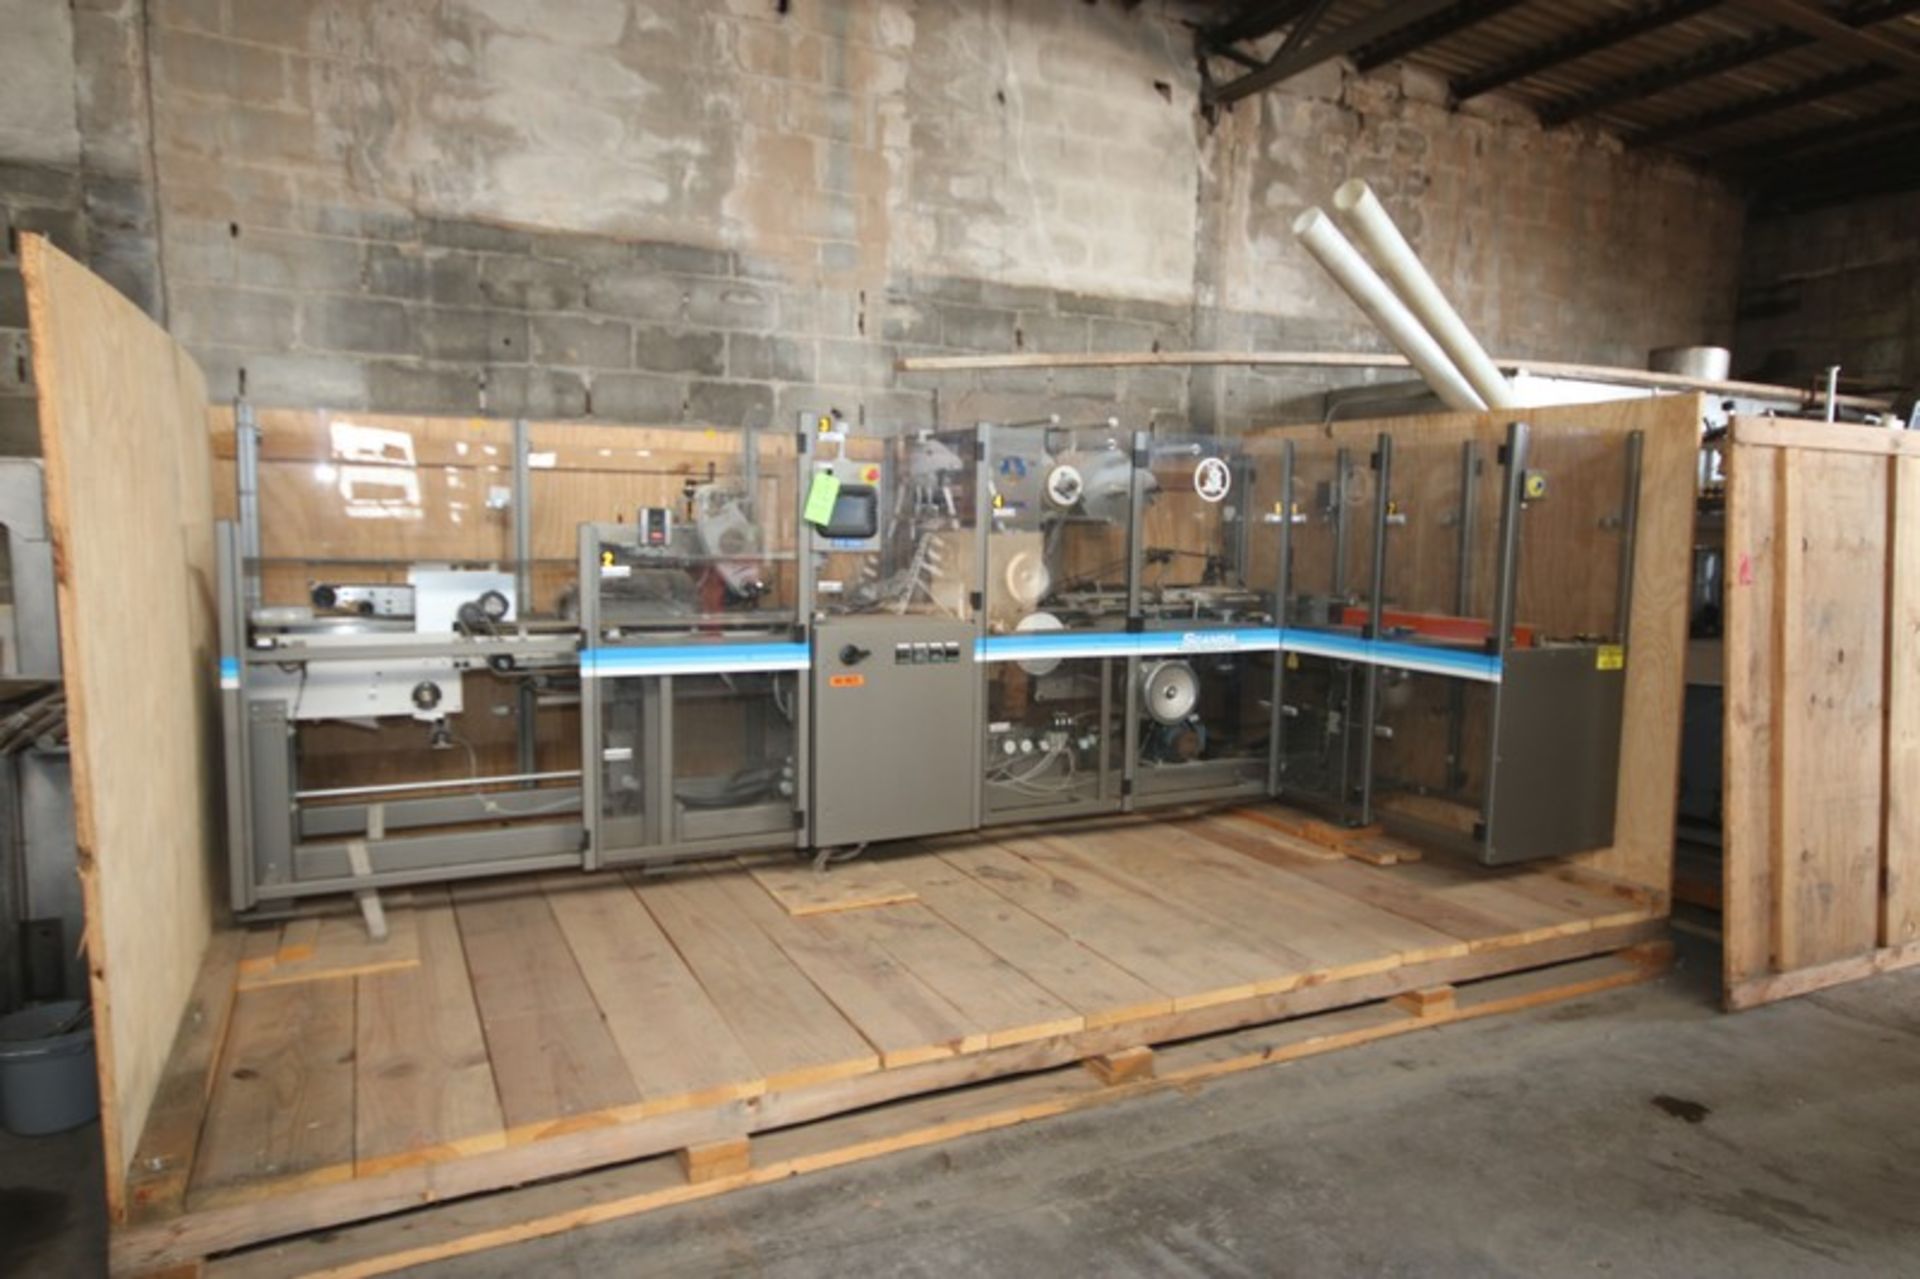 Scandia Packaging Machine, M/N 609, S/N 1-6721, with Touchscreens Display, with Allen Bradley PLC,